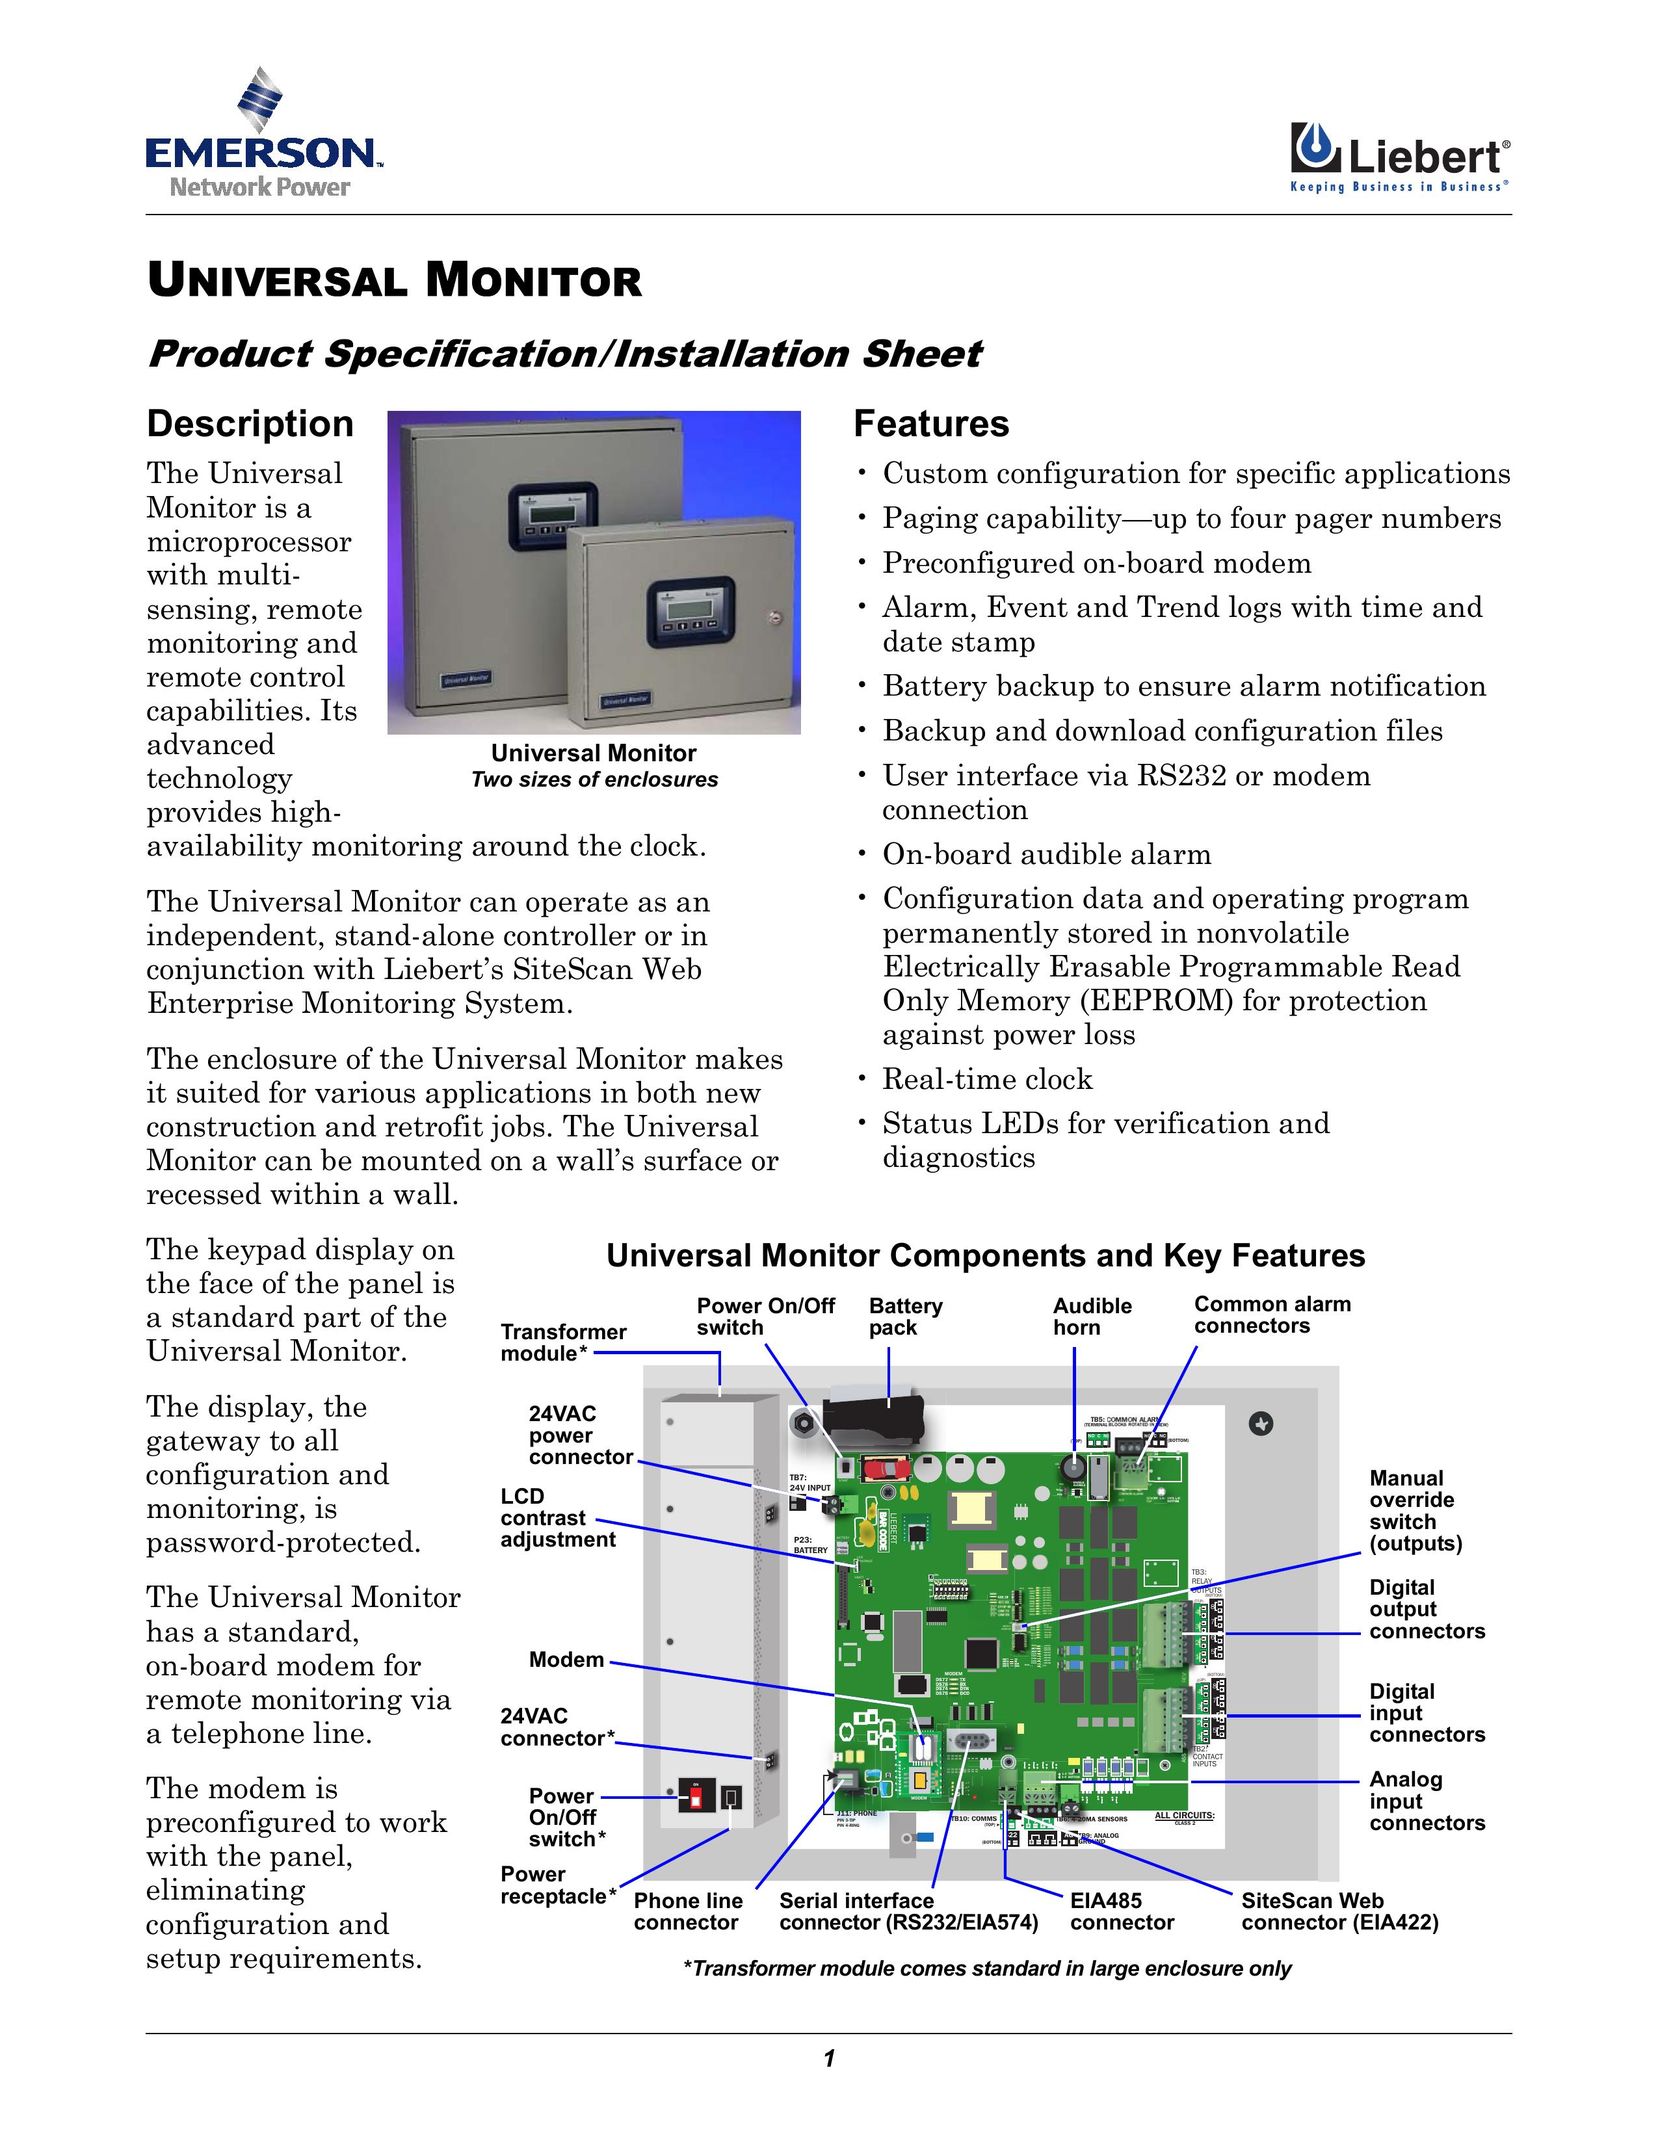 Emerson UML23000 Pager User Manual